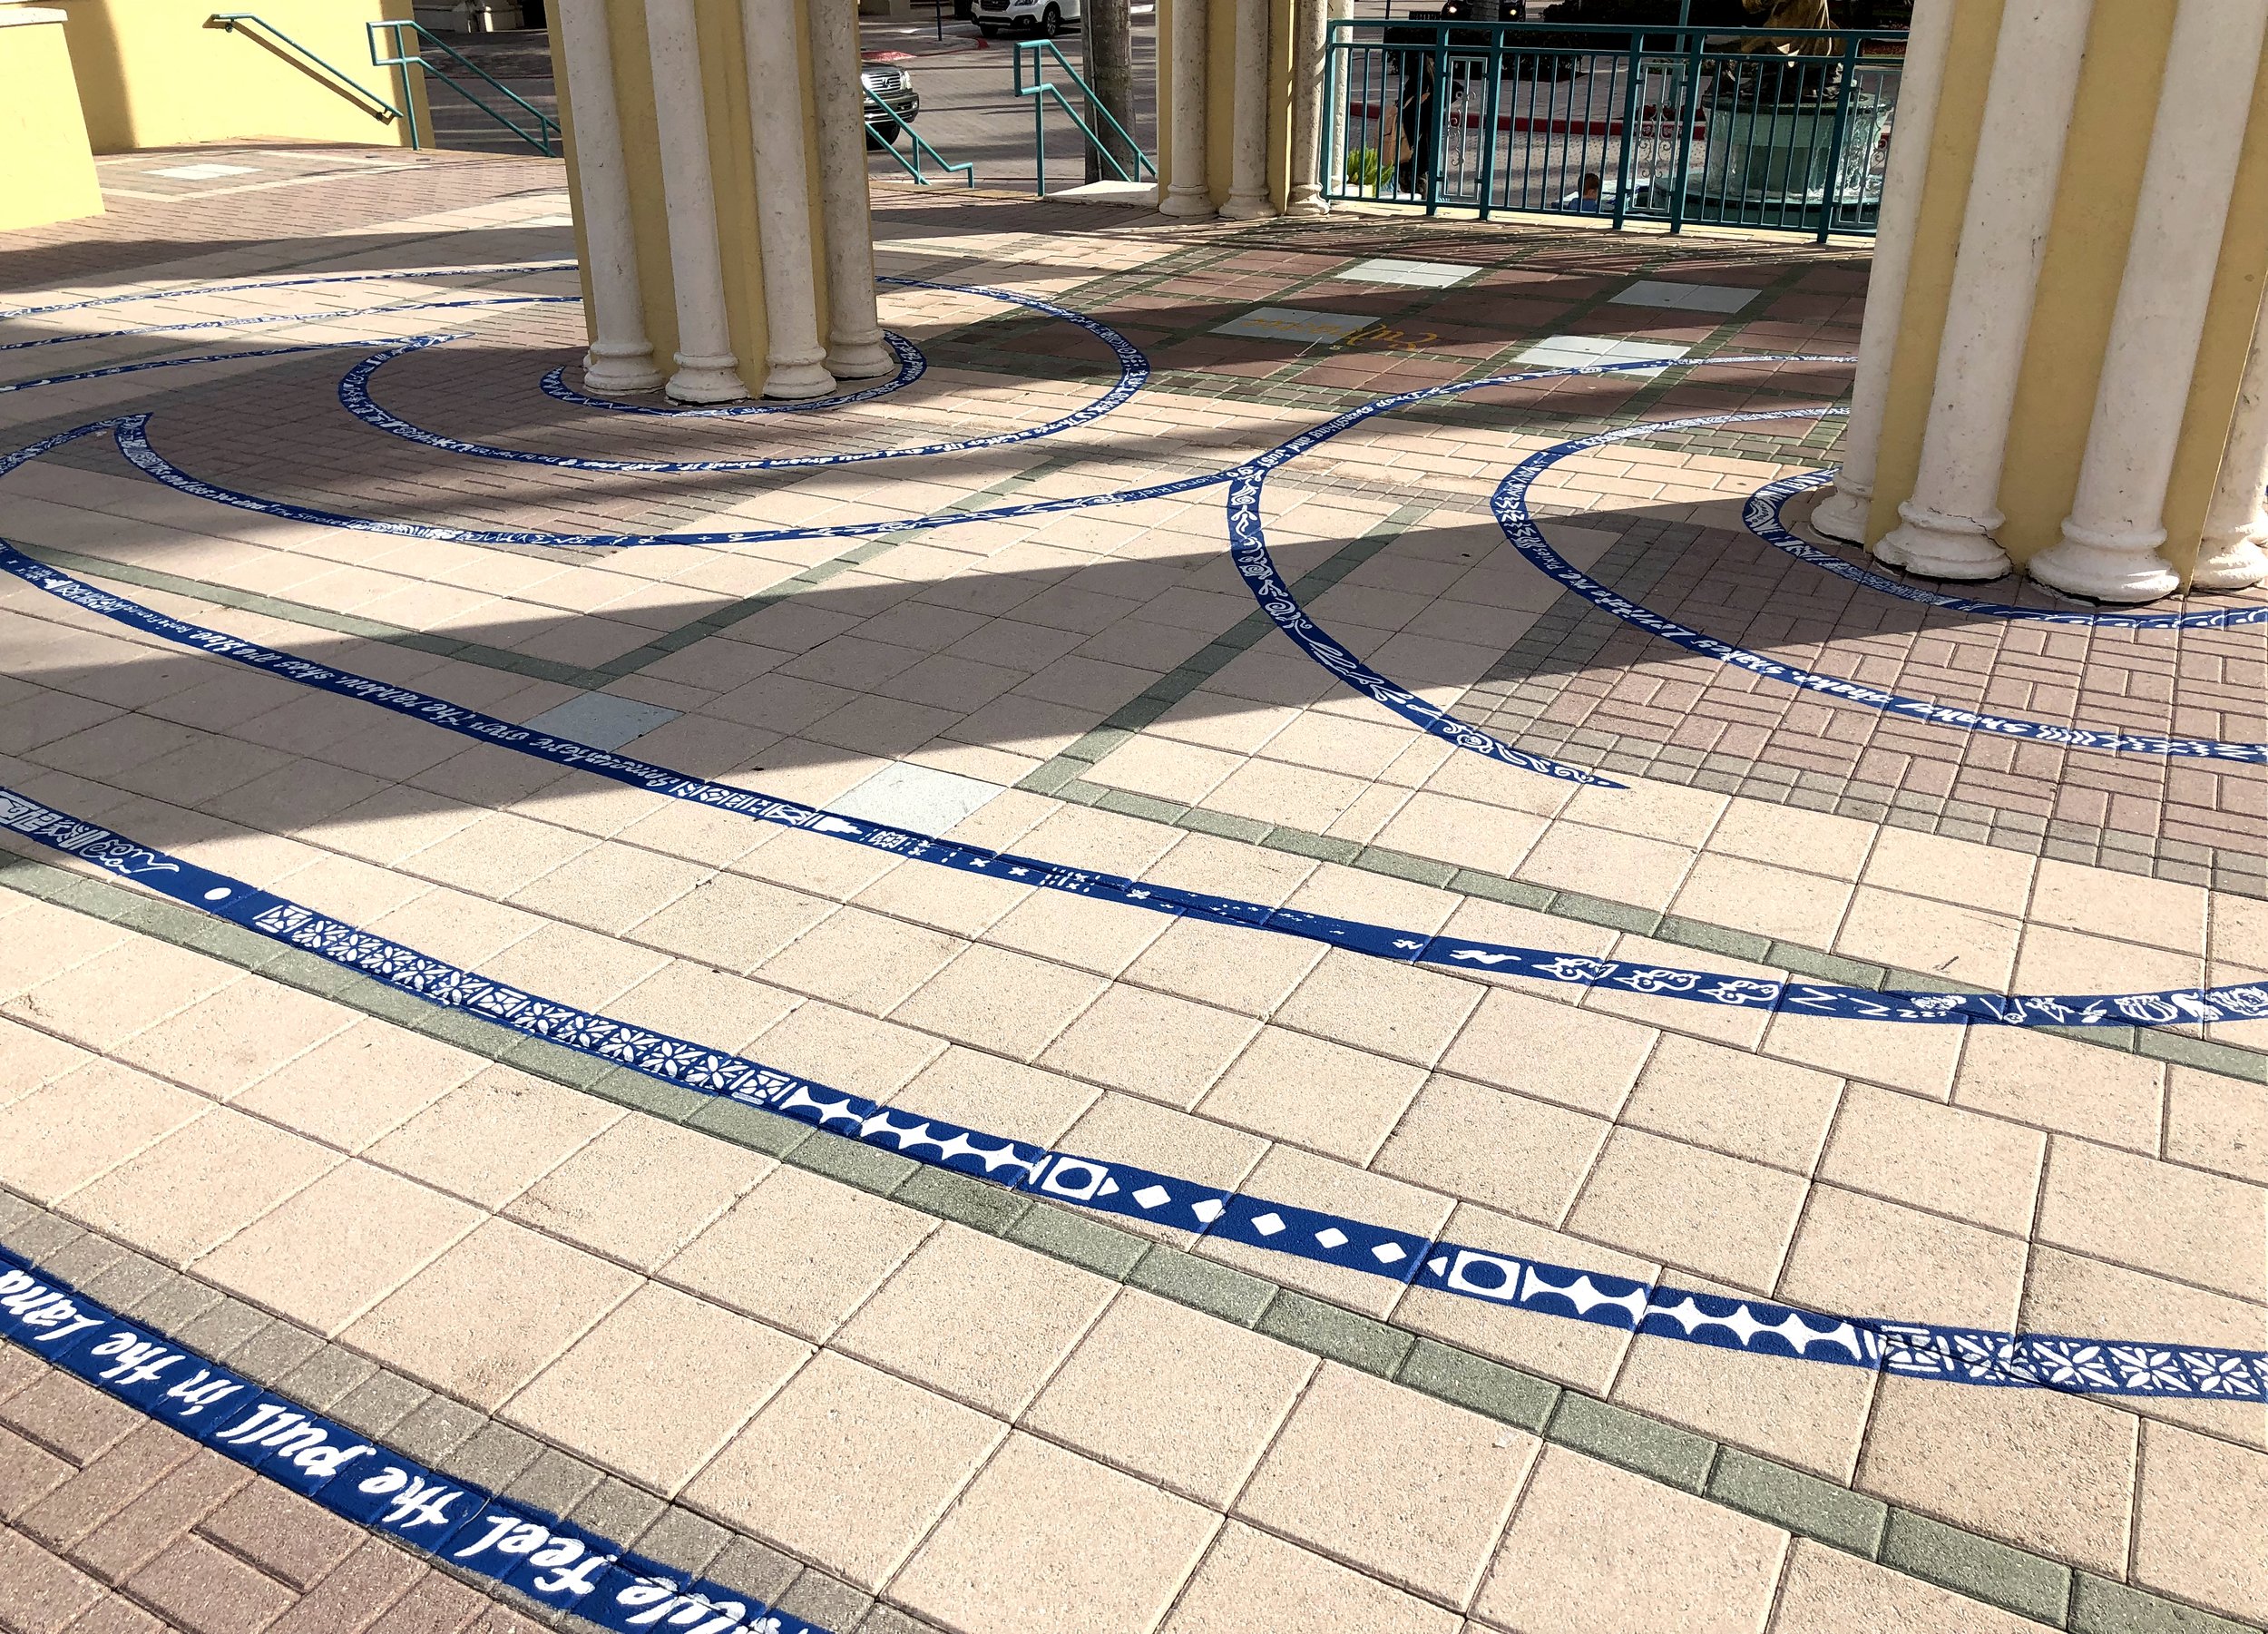   Labyrinth  floor mural commissioned by The Mizner Park Amphitheater. 2000 sq ft 590 Plaza Real, Boca Raton, FL, 33432. 2019 